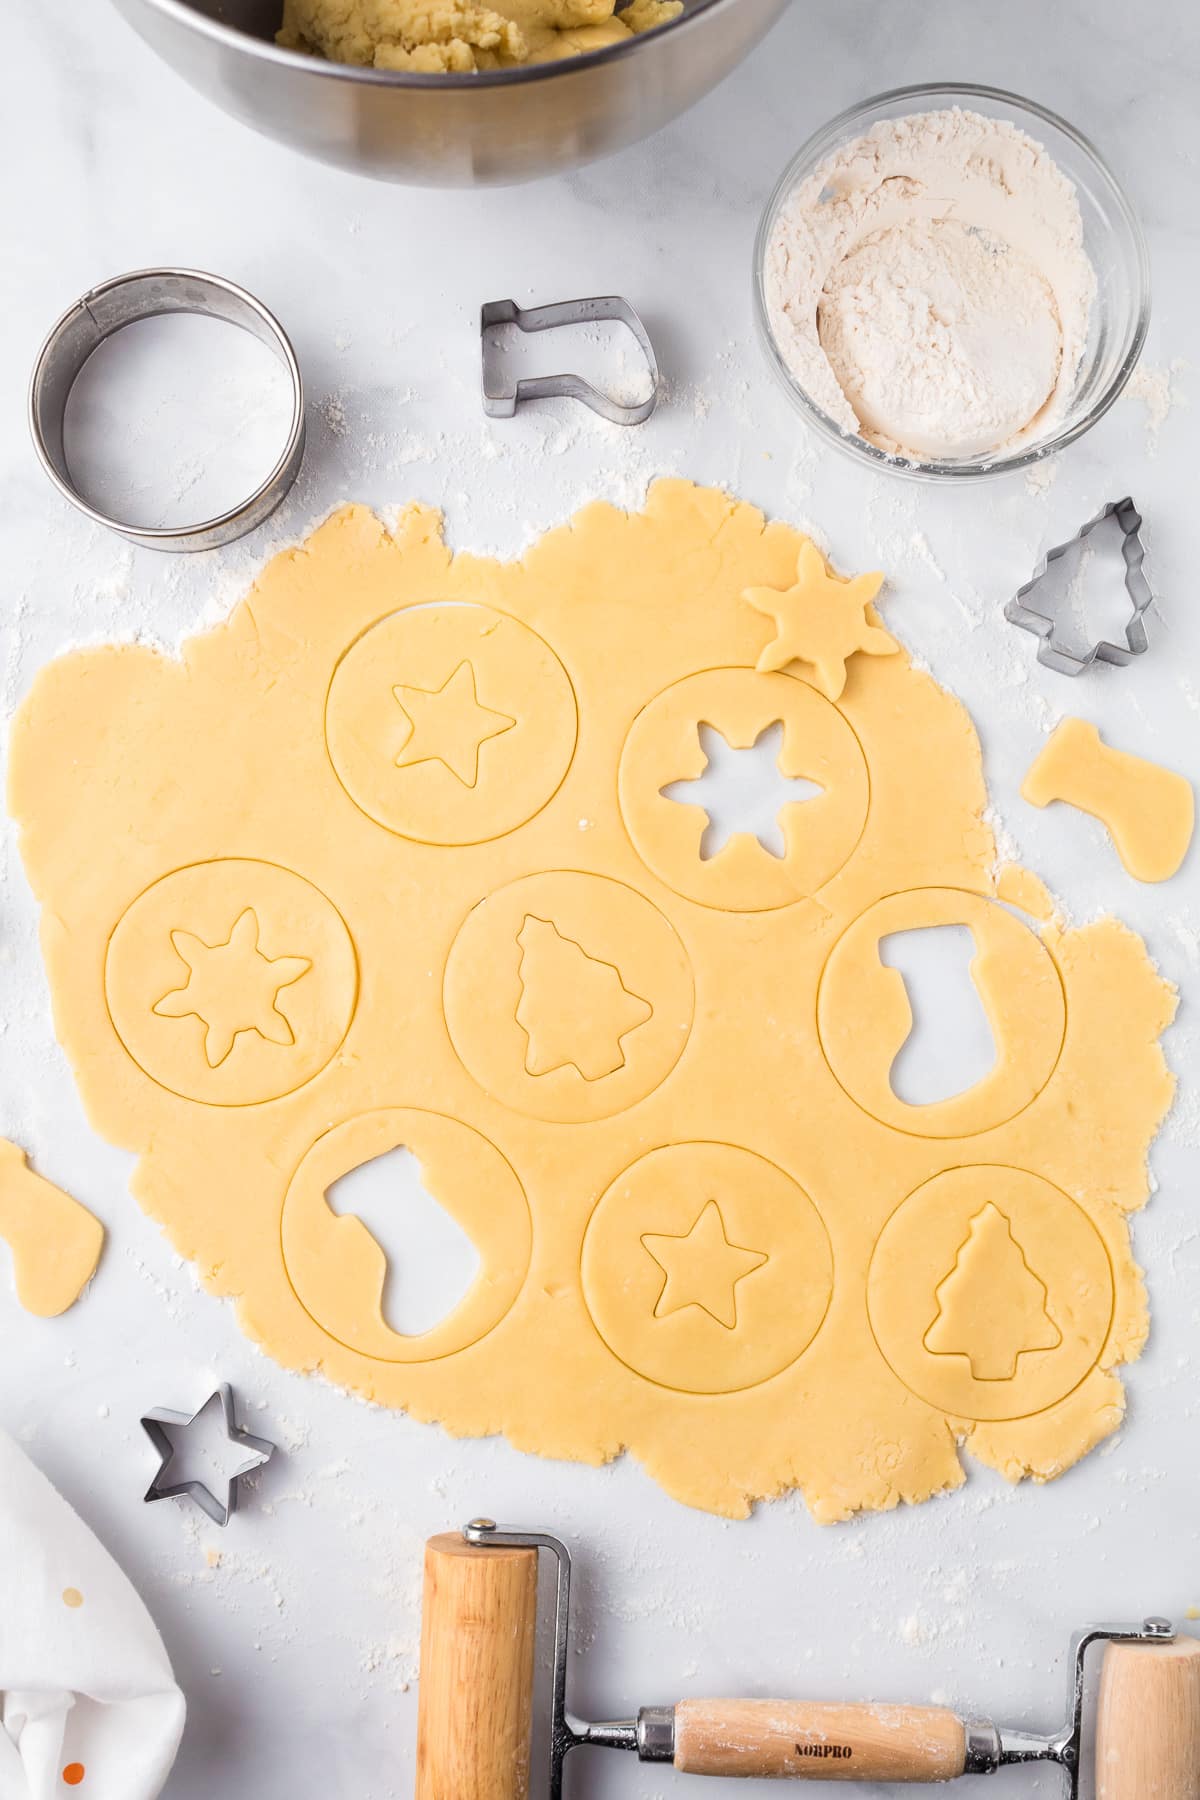 Christmas sugar cookie dough being cut into round circles with the centers of each circle being cut into different holiday shapes.